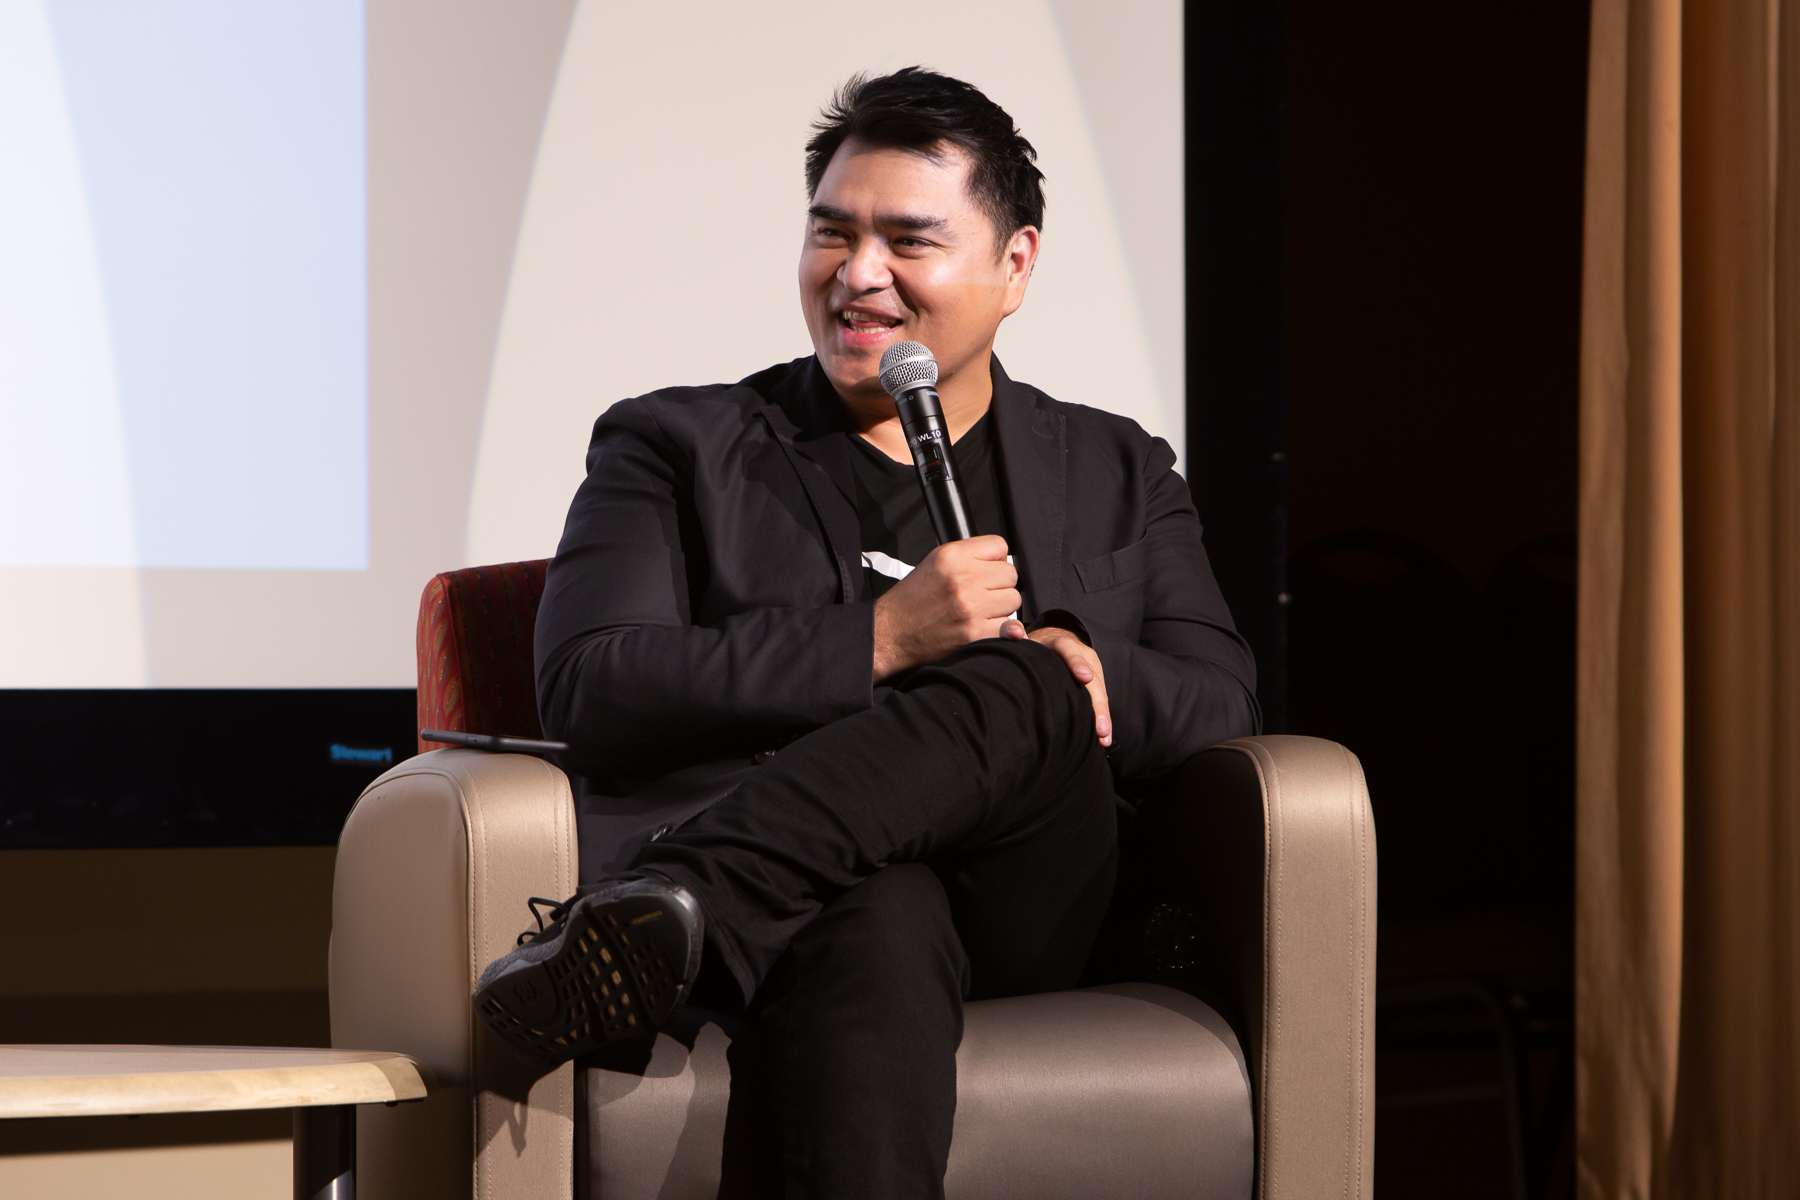 Jose Antonio Vargas shares his story about his childhood in the Philippines and how he came to the United States. ((DePaul University/Randall Spriggs)